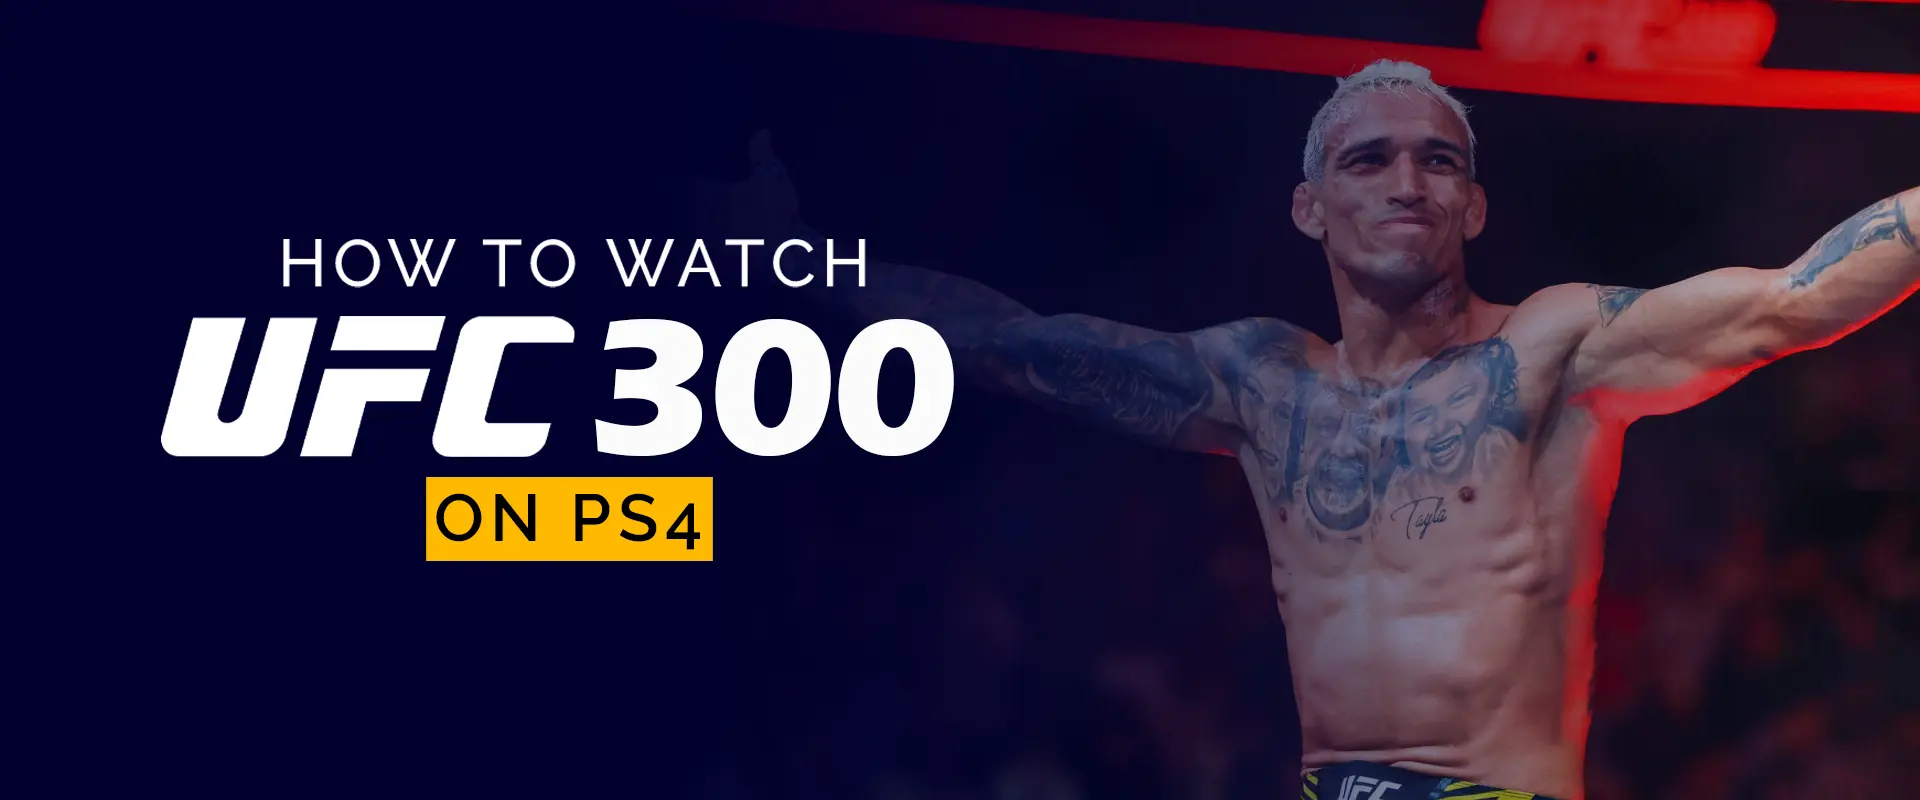 How to Watch UFC 300 on PS4